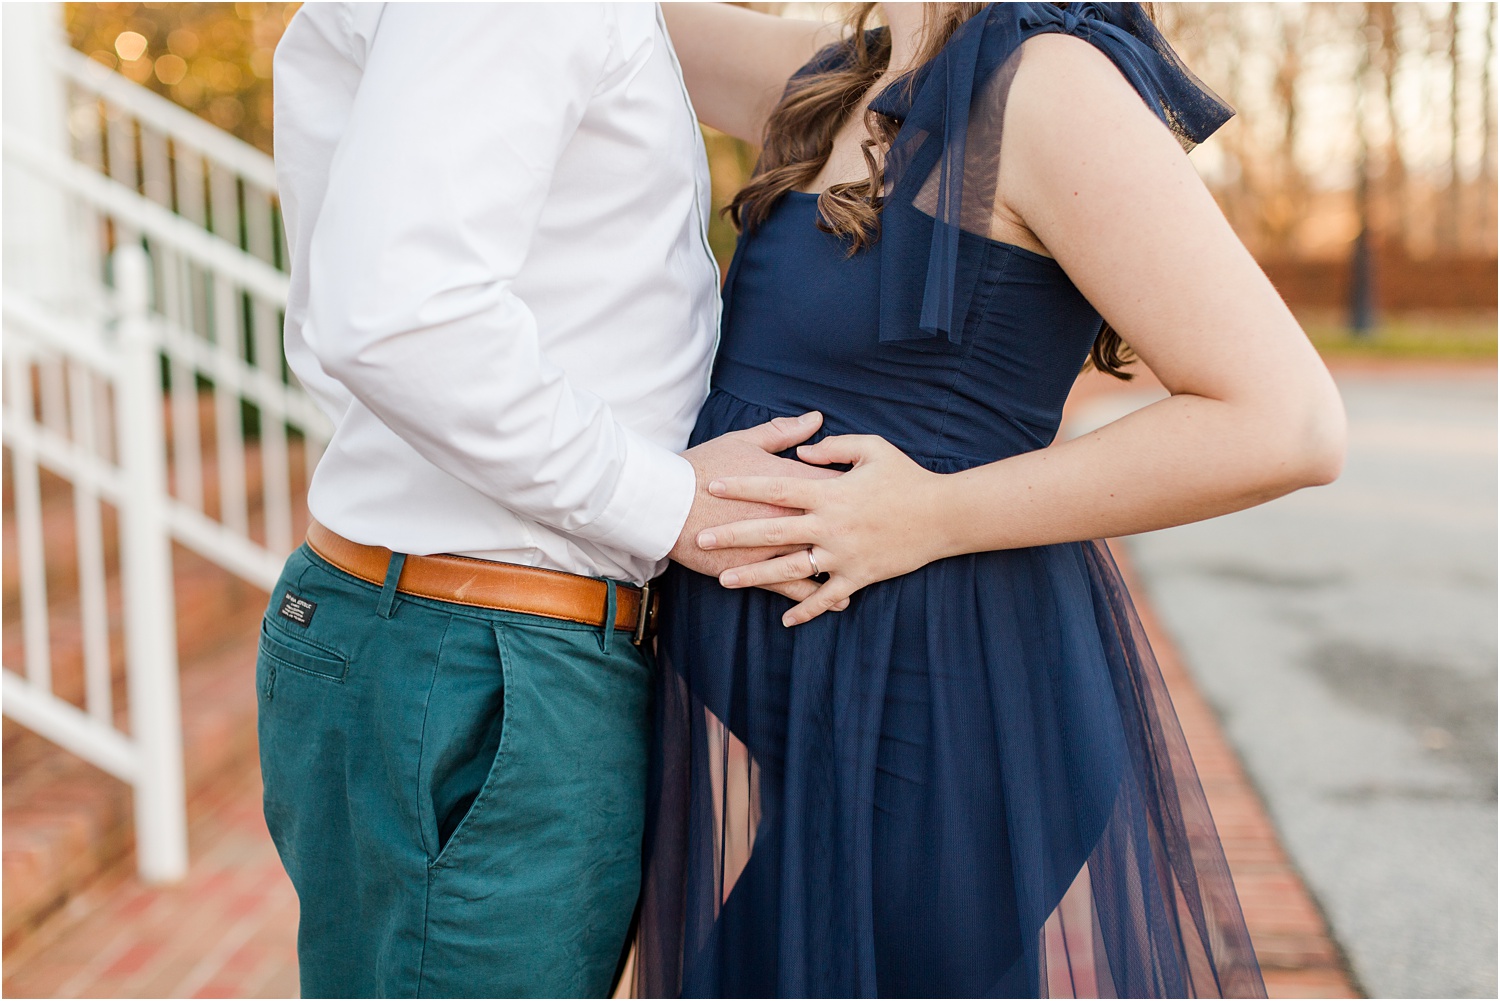 Fall Inspired Maternity Session